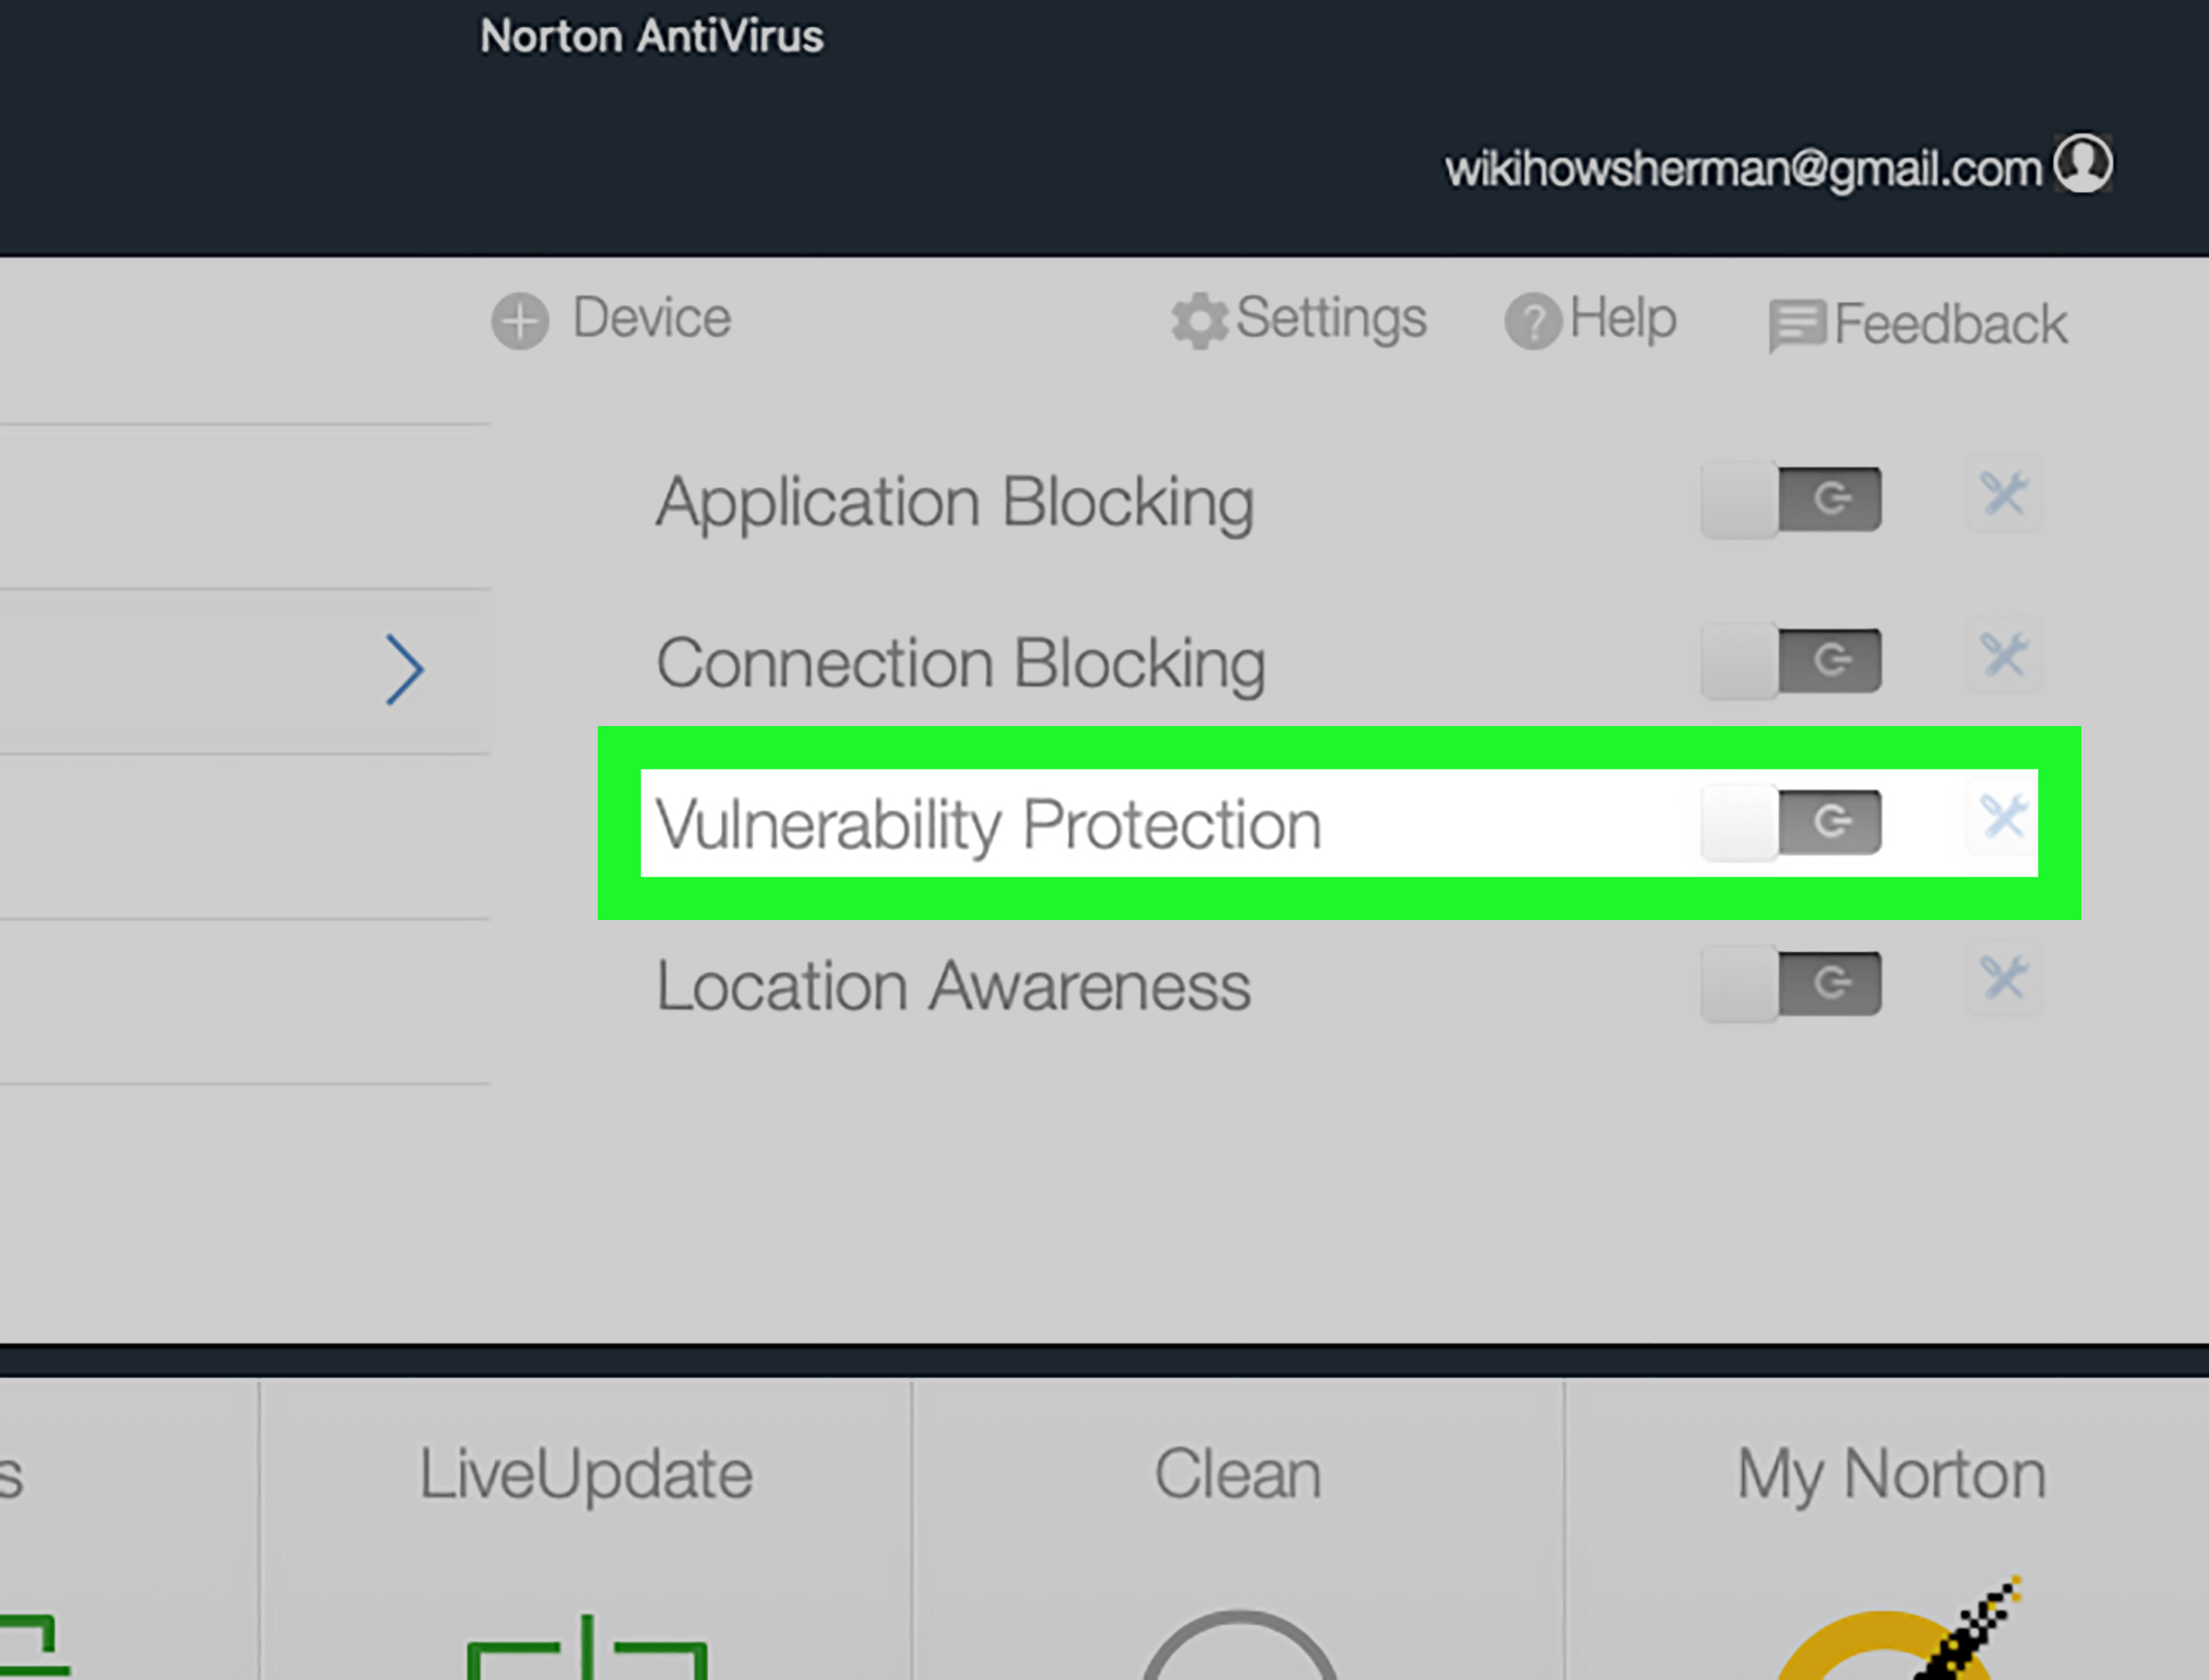 Open the antivirus software or firewall settings
Locate the option to disable or turn off the protection